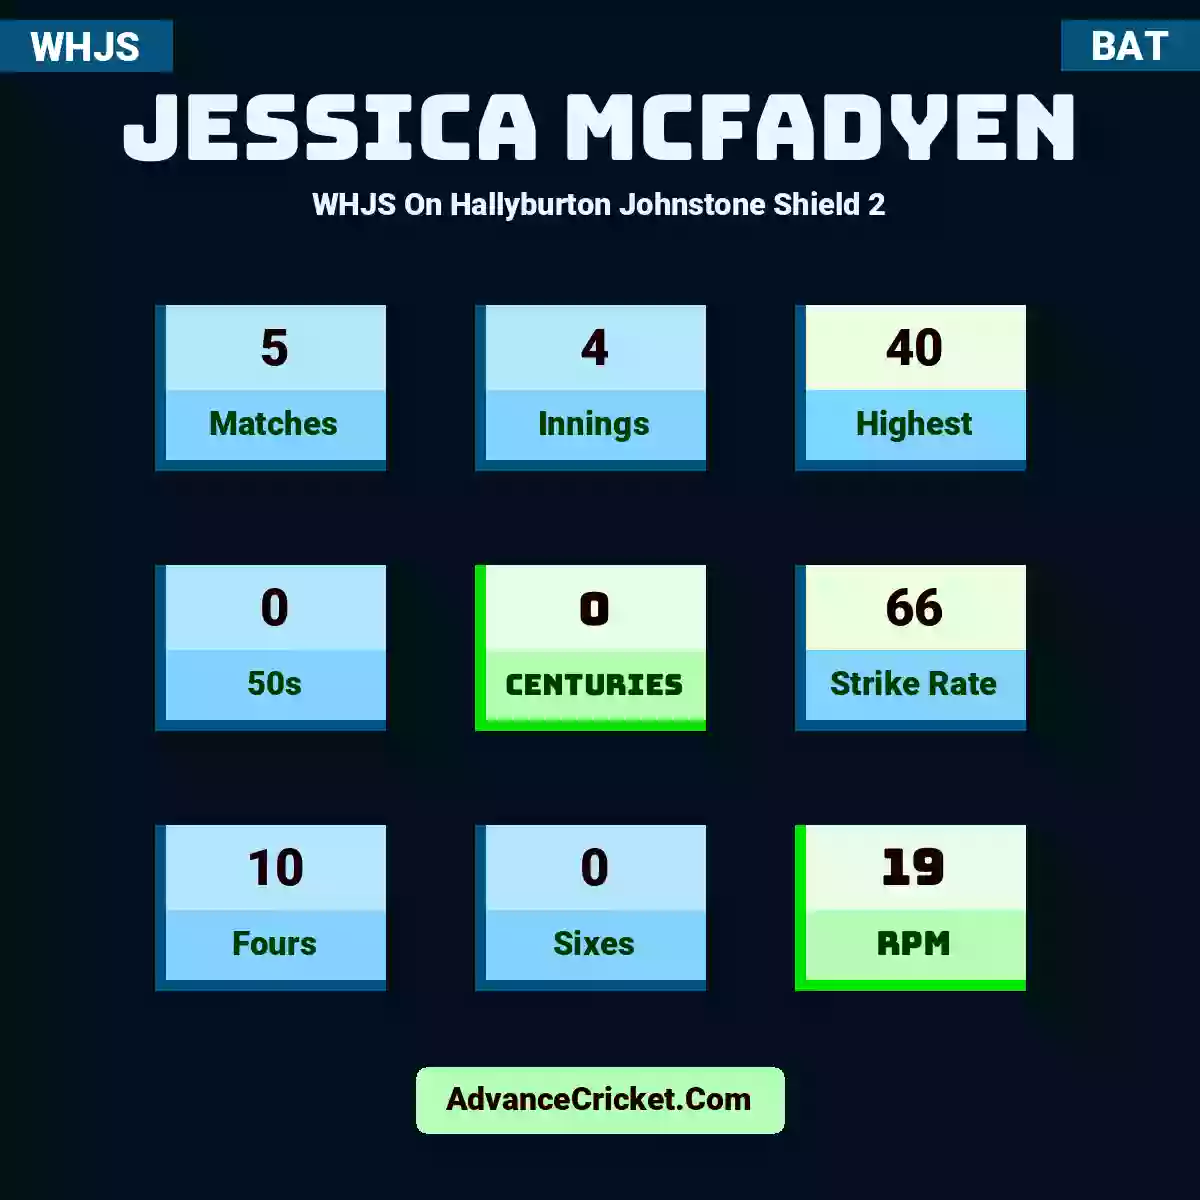 Jessica McFadyen WHJS  On Hallyburton Johnstone Shield 2, Jessica McFadyen played 5 matches, scored 40 runs as highest, 0 half-centuries, and 0 centuries, with a strike rate of 66. J.McFadyen hit 10 fours and 0 sixes, with an RPM of 19.